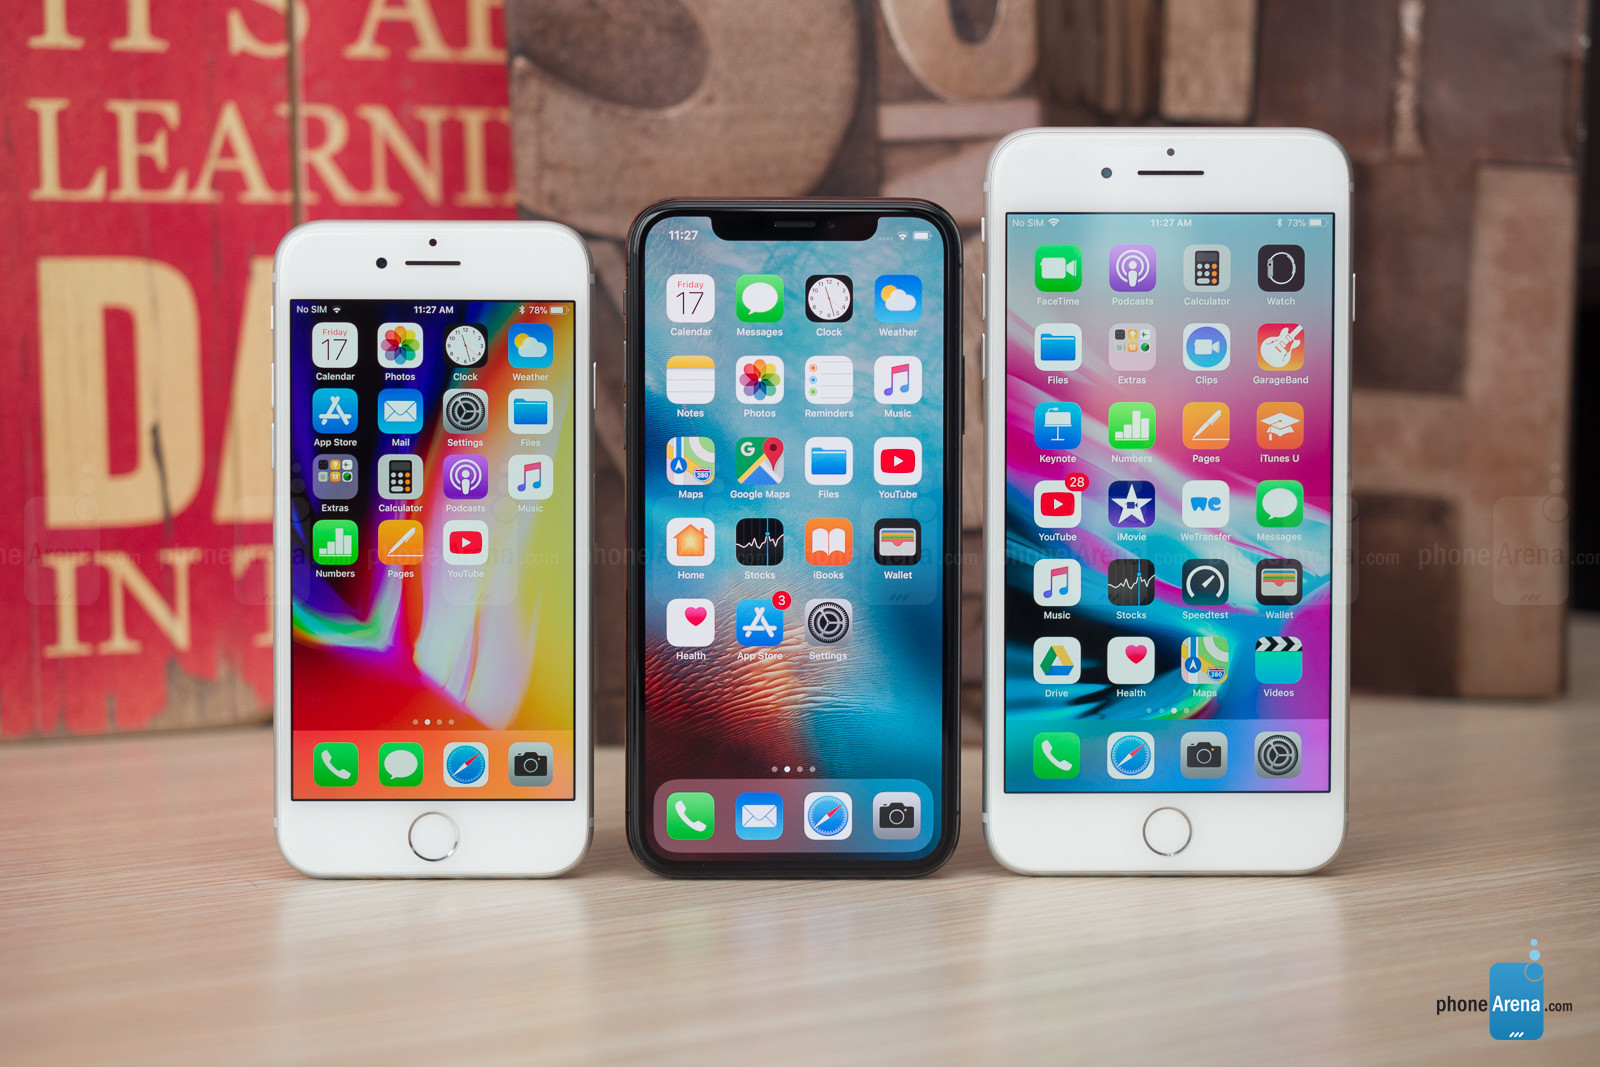 2018 6.5Inch iPhone to Be Similar in Size to iPhone 8 Plus, iOS 12